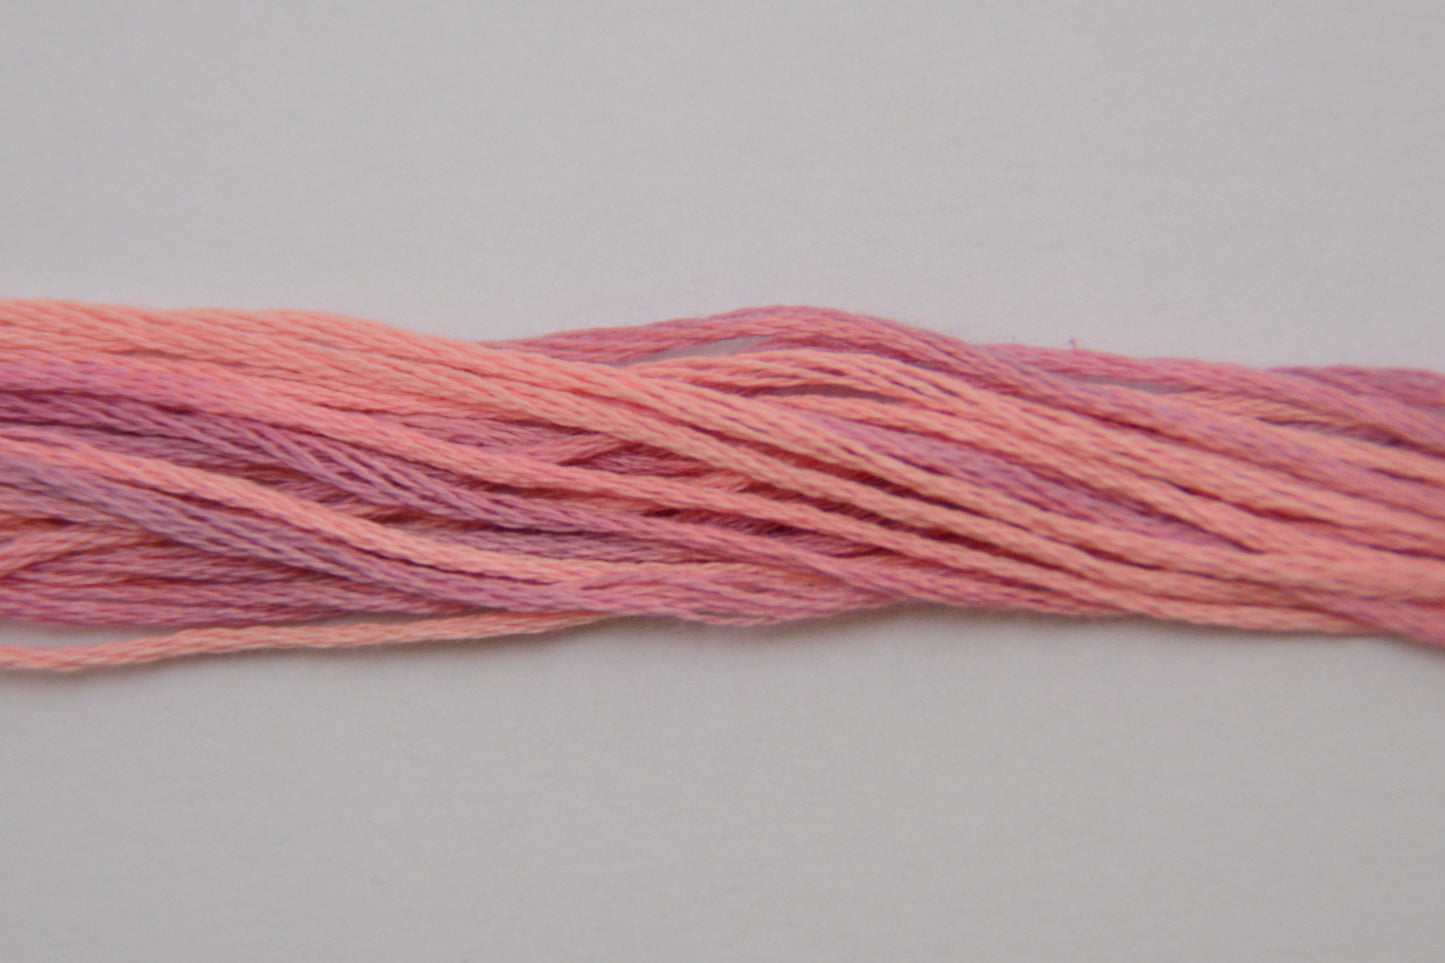 Sweetheart Rose 2279 Weeks Dye Works 6-Strand Hand-Dyed Embroidery Floss